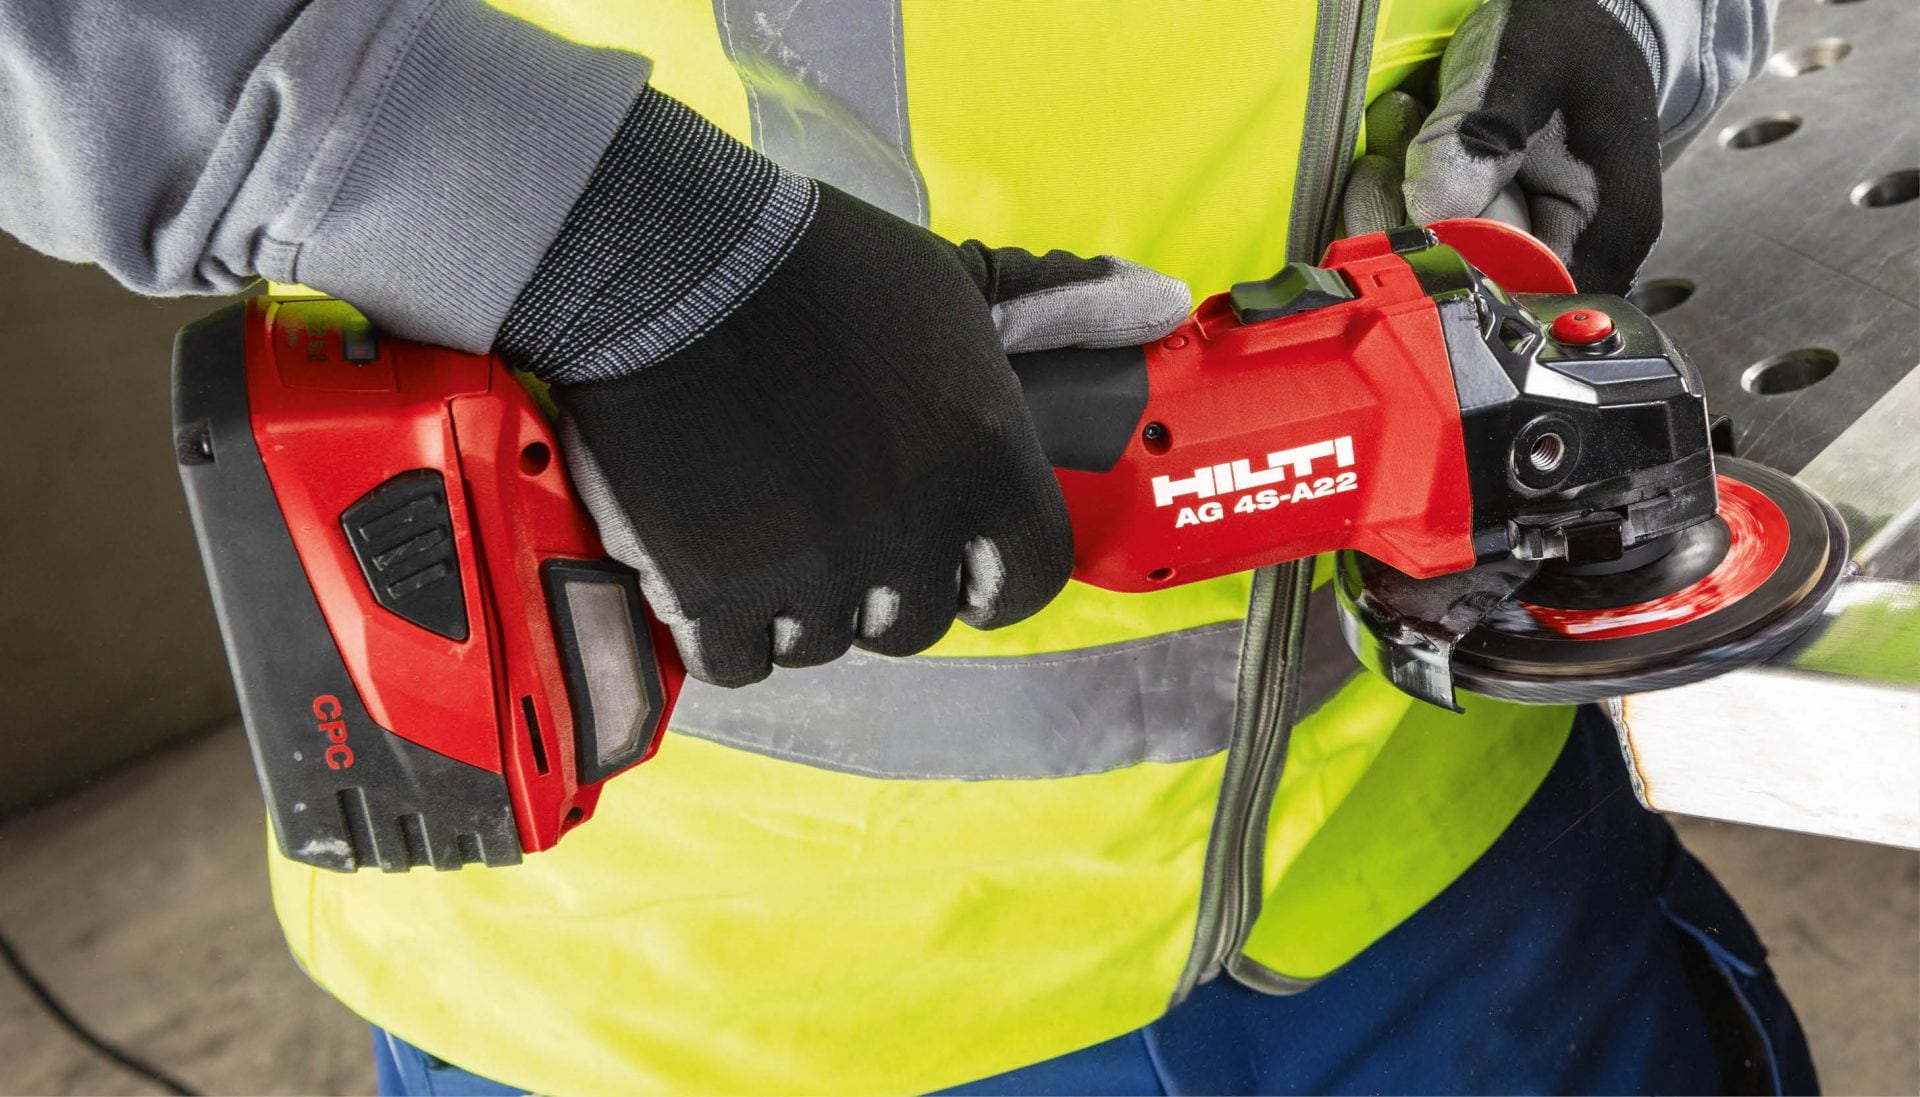 Introducing the AG 4S-A22 cordless grinder